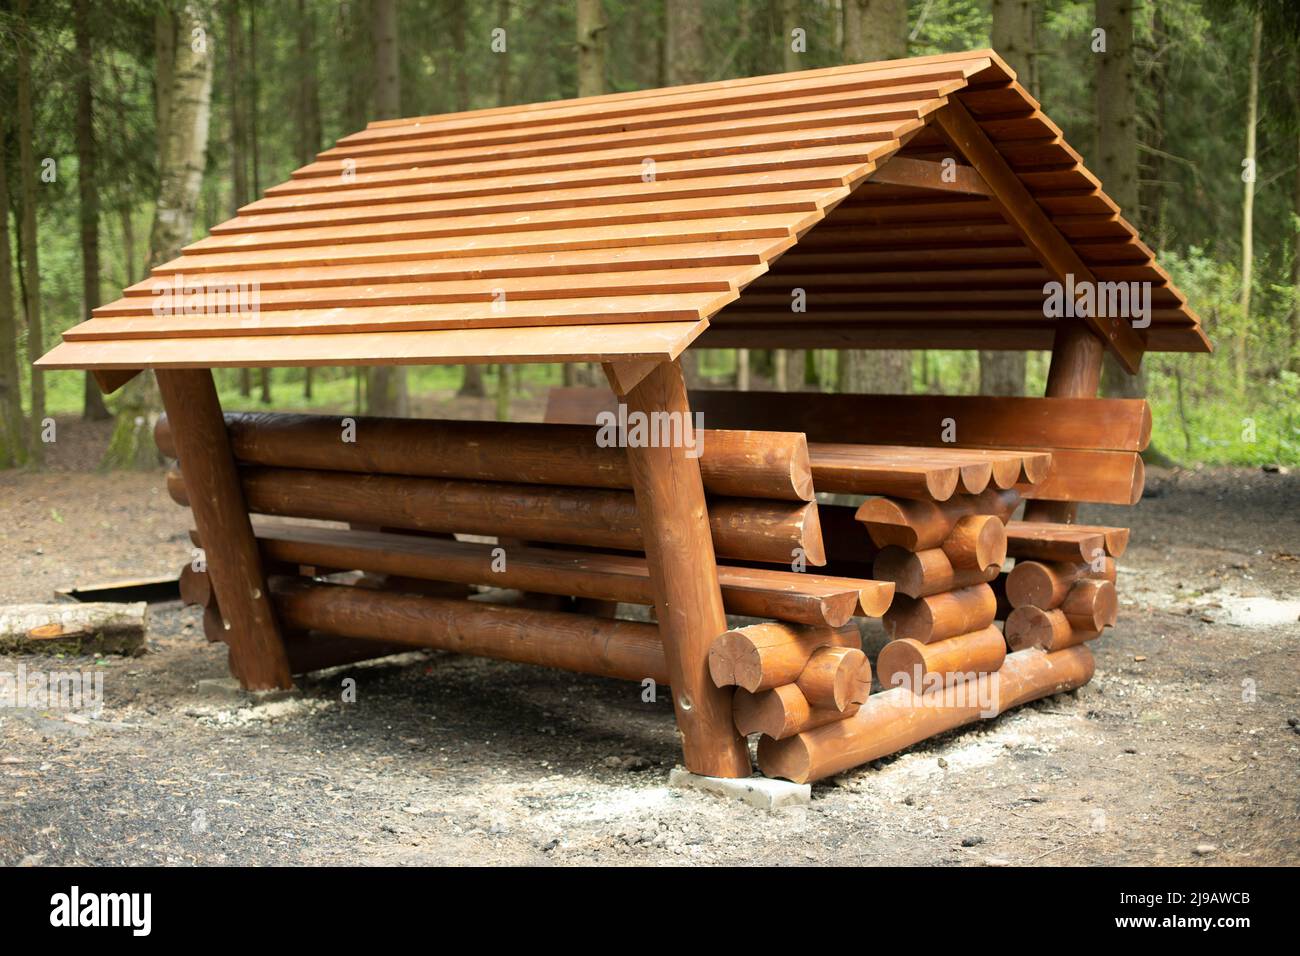 Cabin for relaxation in forest. Place for picnic in nature. Log structure. Place to relax. Stock Photo